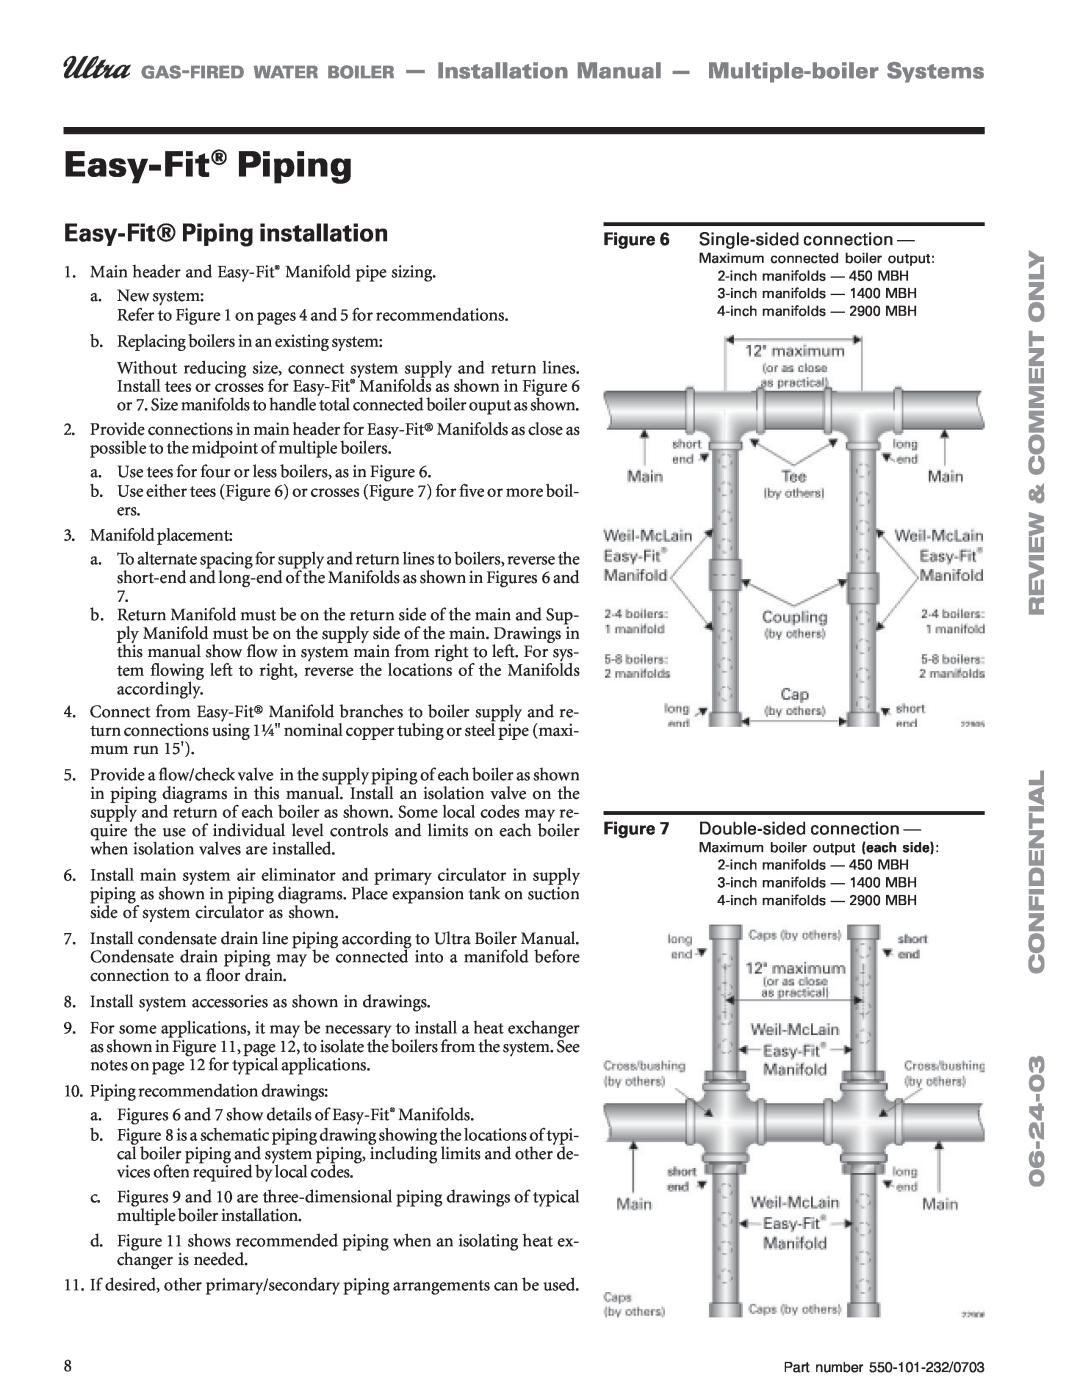 Weil-McLain Boiler installation manual Easy-Fit Piping, Easy-FitPiping installation, Review & Comment Only Confidential 